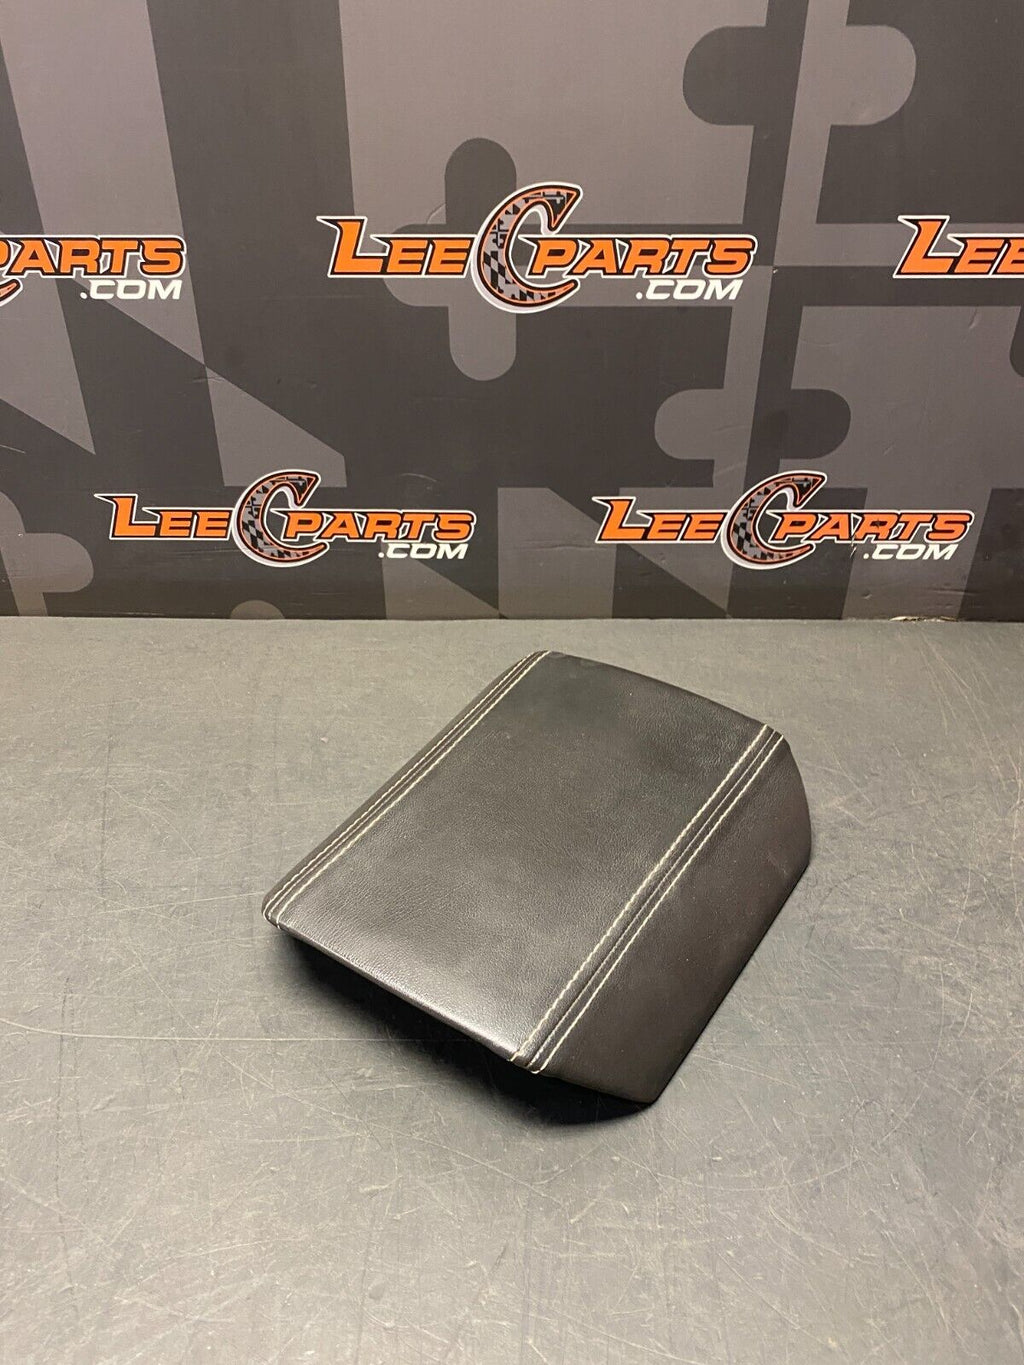 2014 CAMARO SS 1LE OEM CENTER CONSOLE ARM REST BLACK SILVER STITCH USED